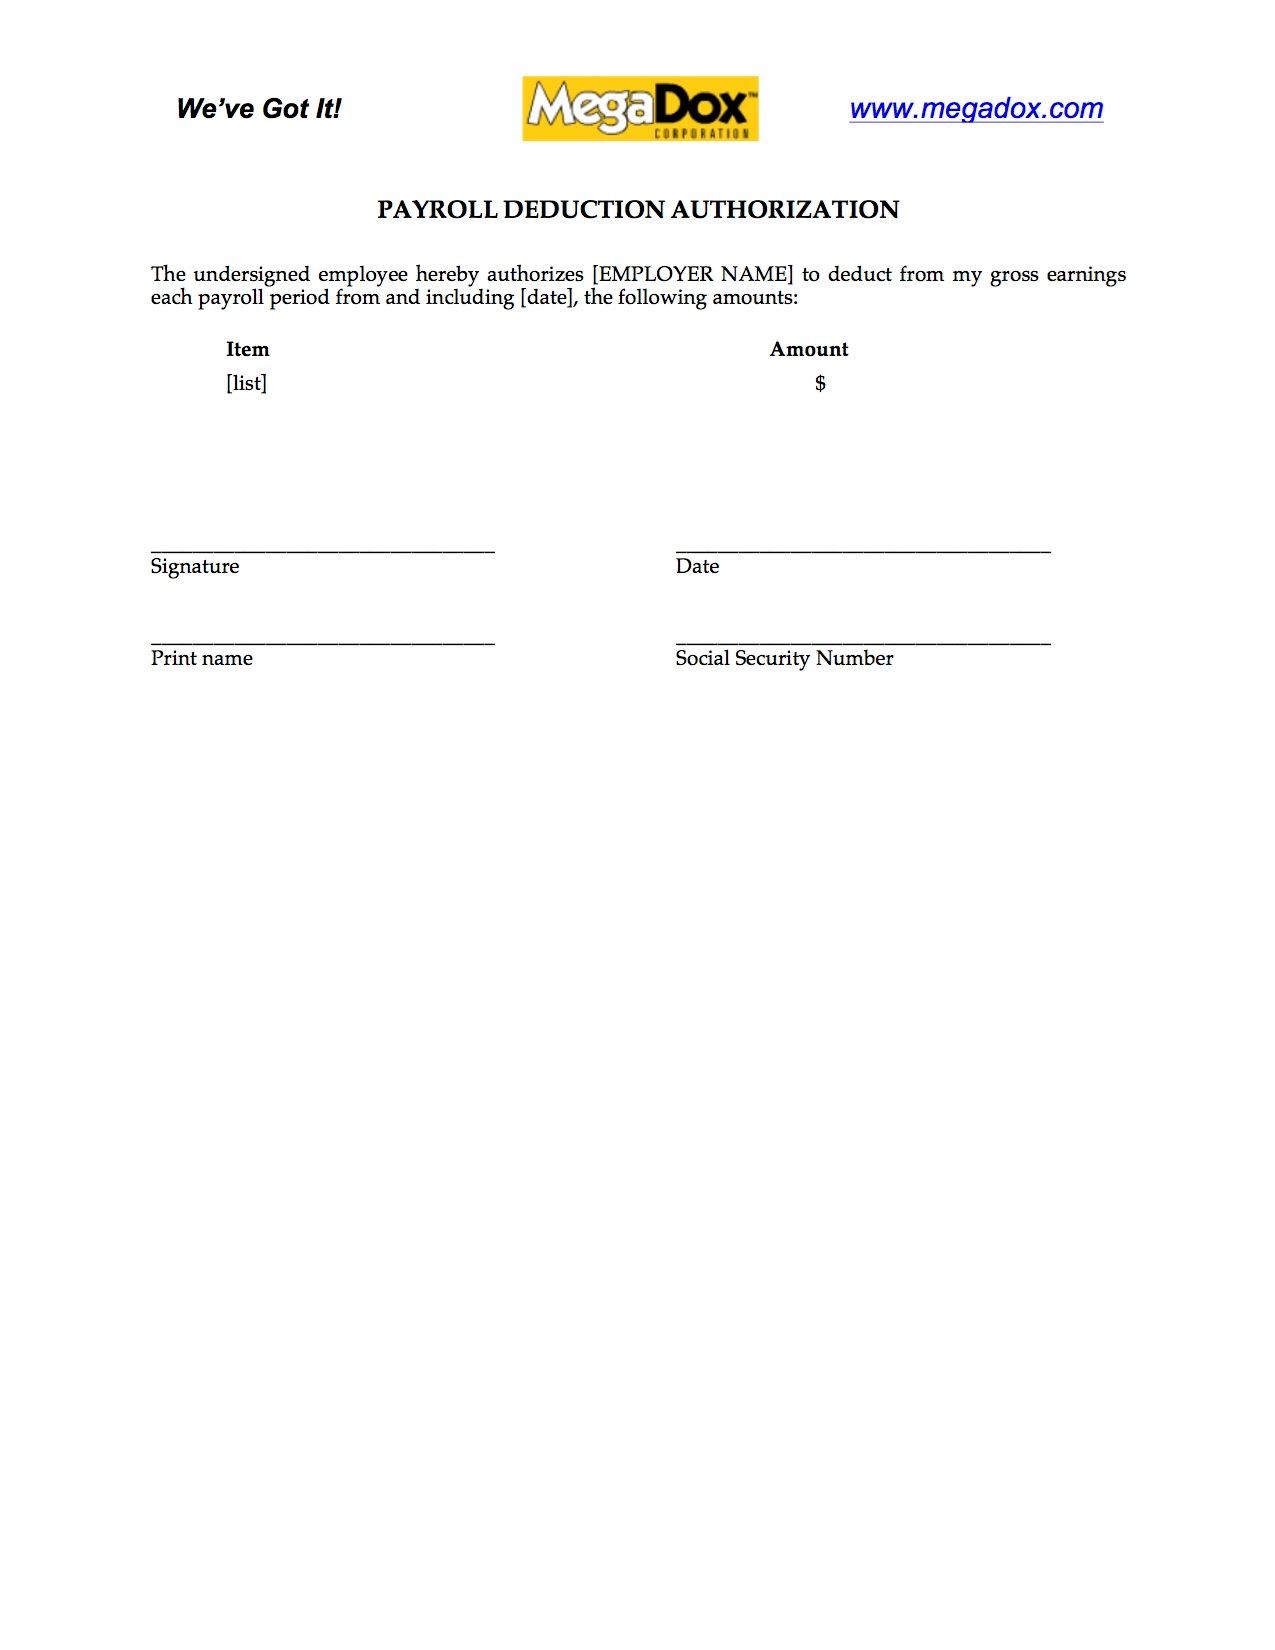 Employee Payroll Deduction Authorization Form Legal Forms And Business Templates Megadox Com